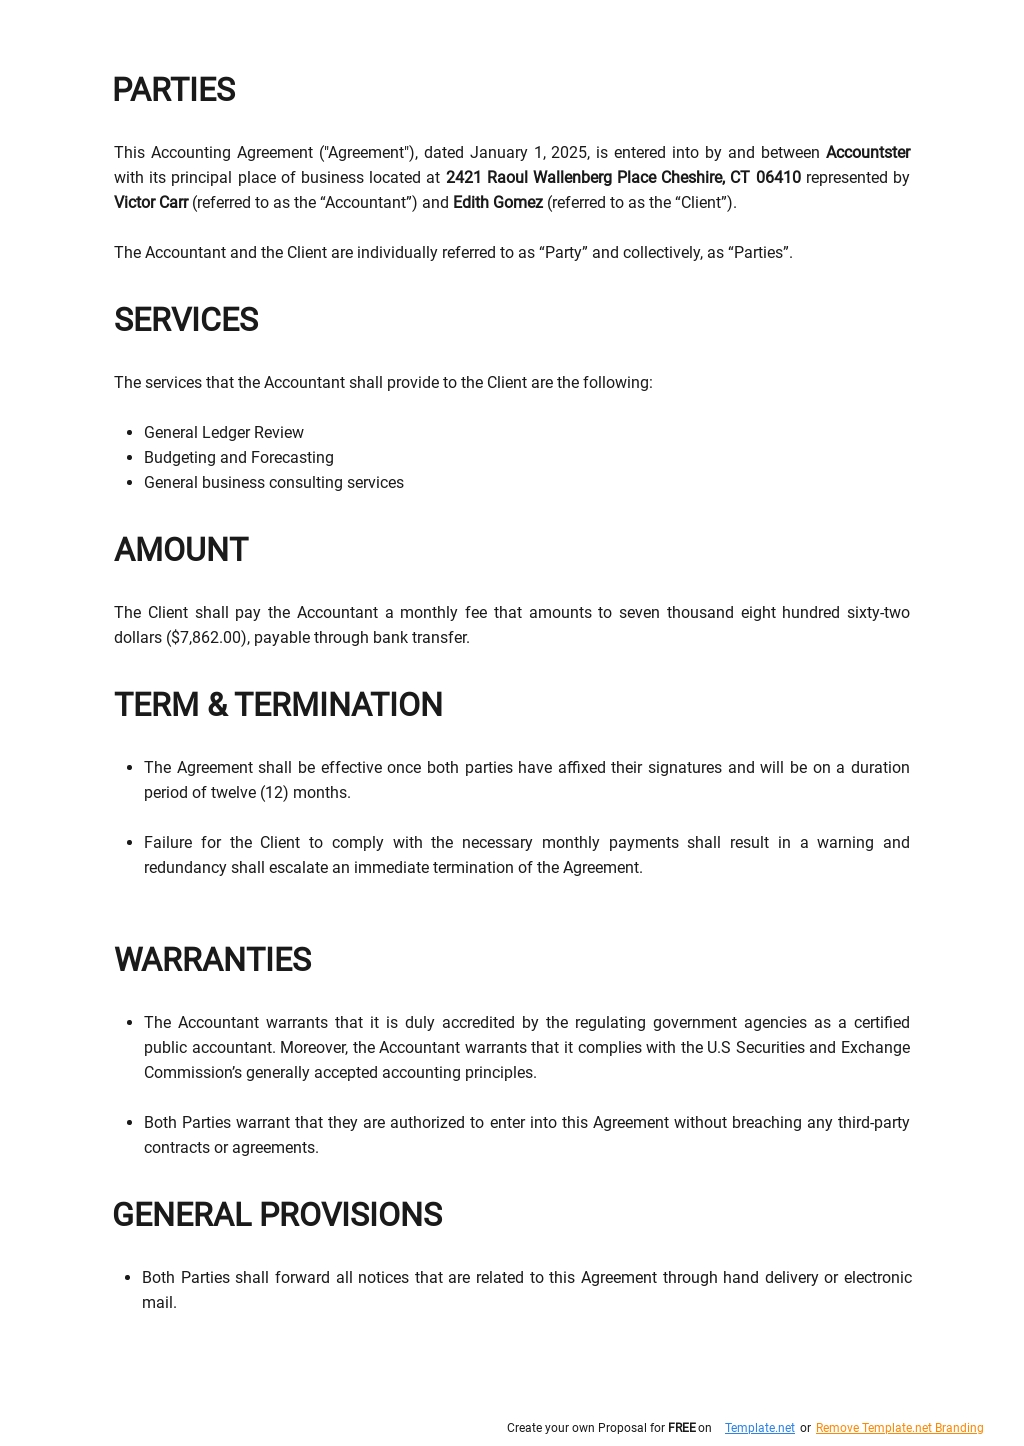 Accounting Agreement Template 1.jpe